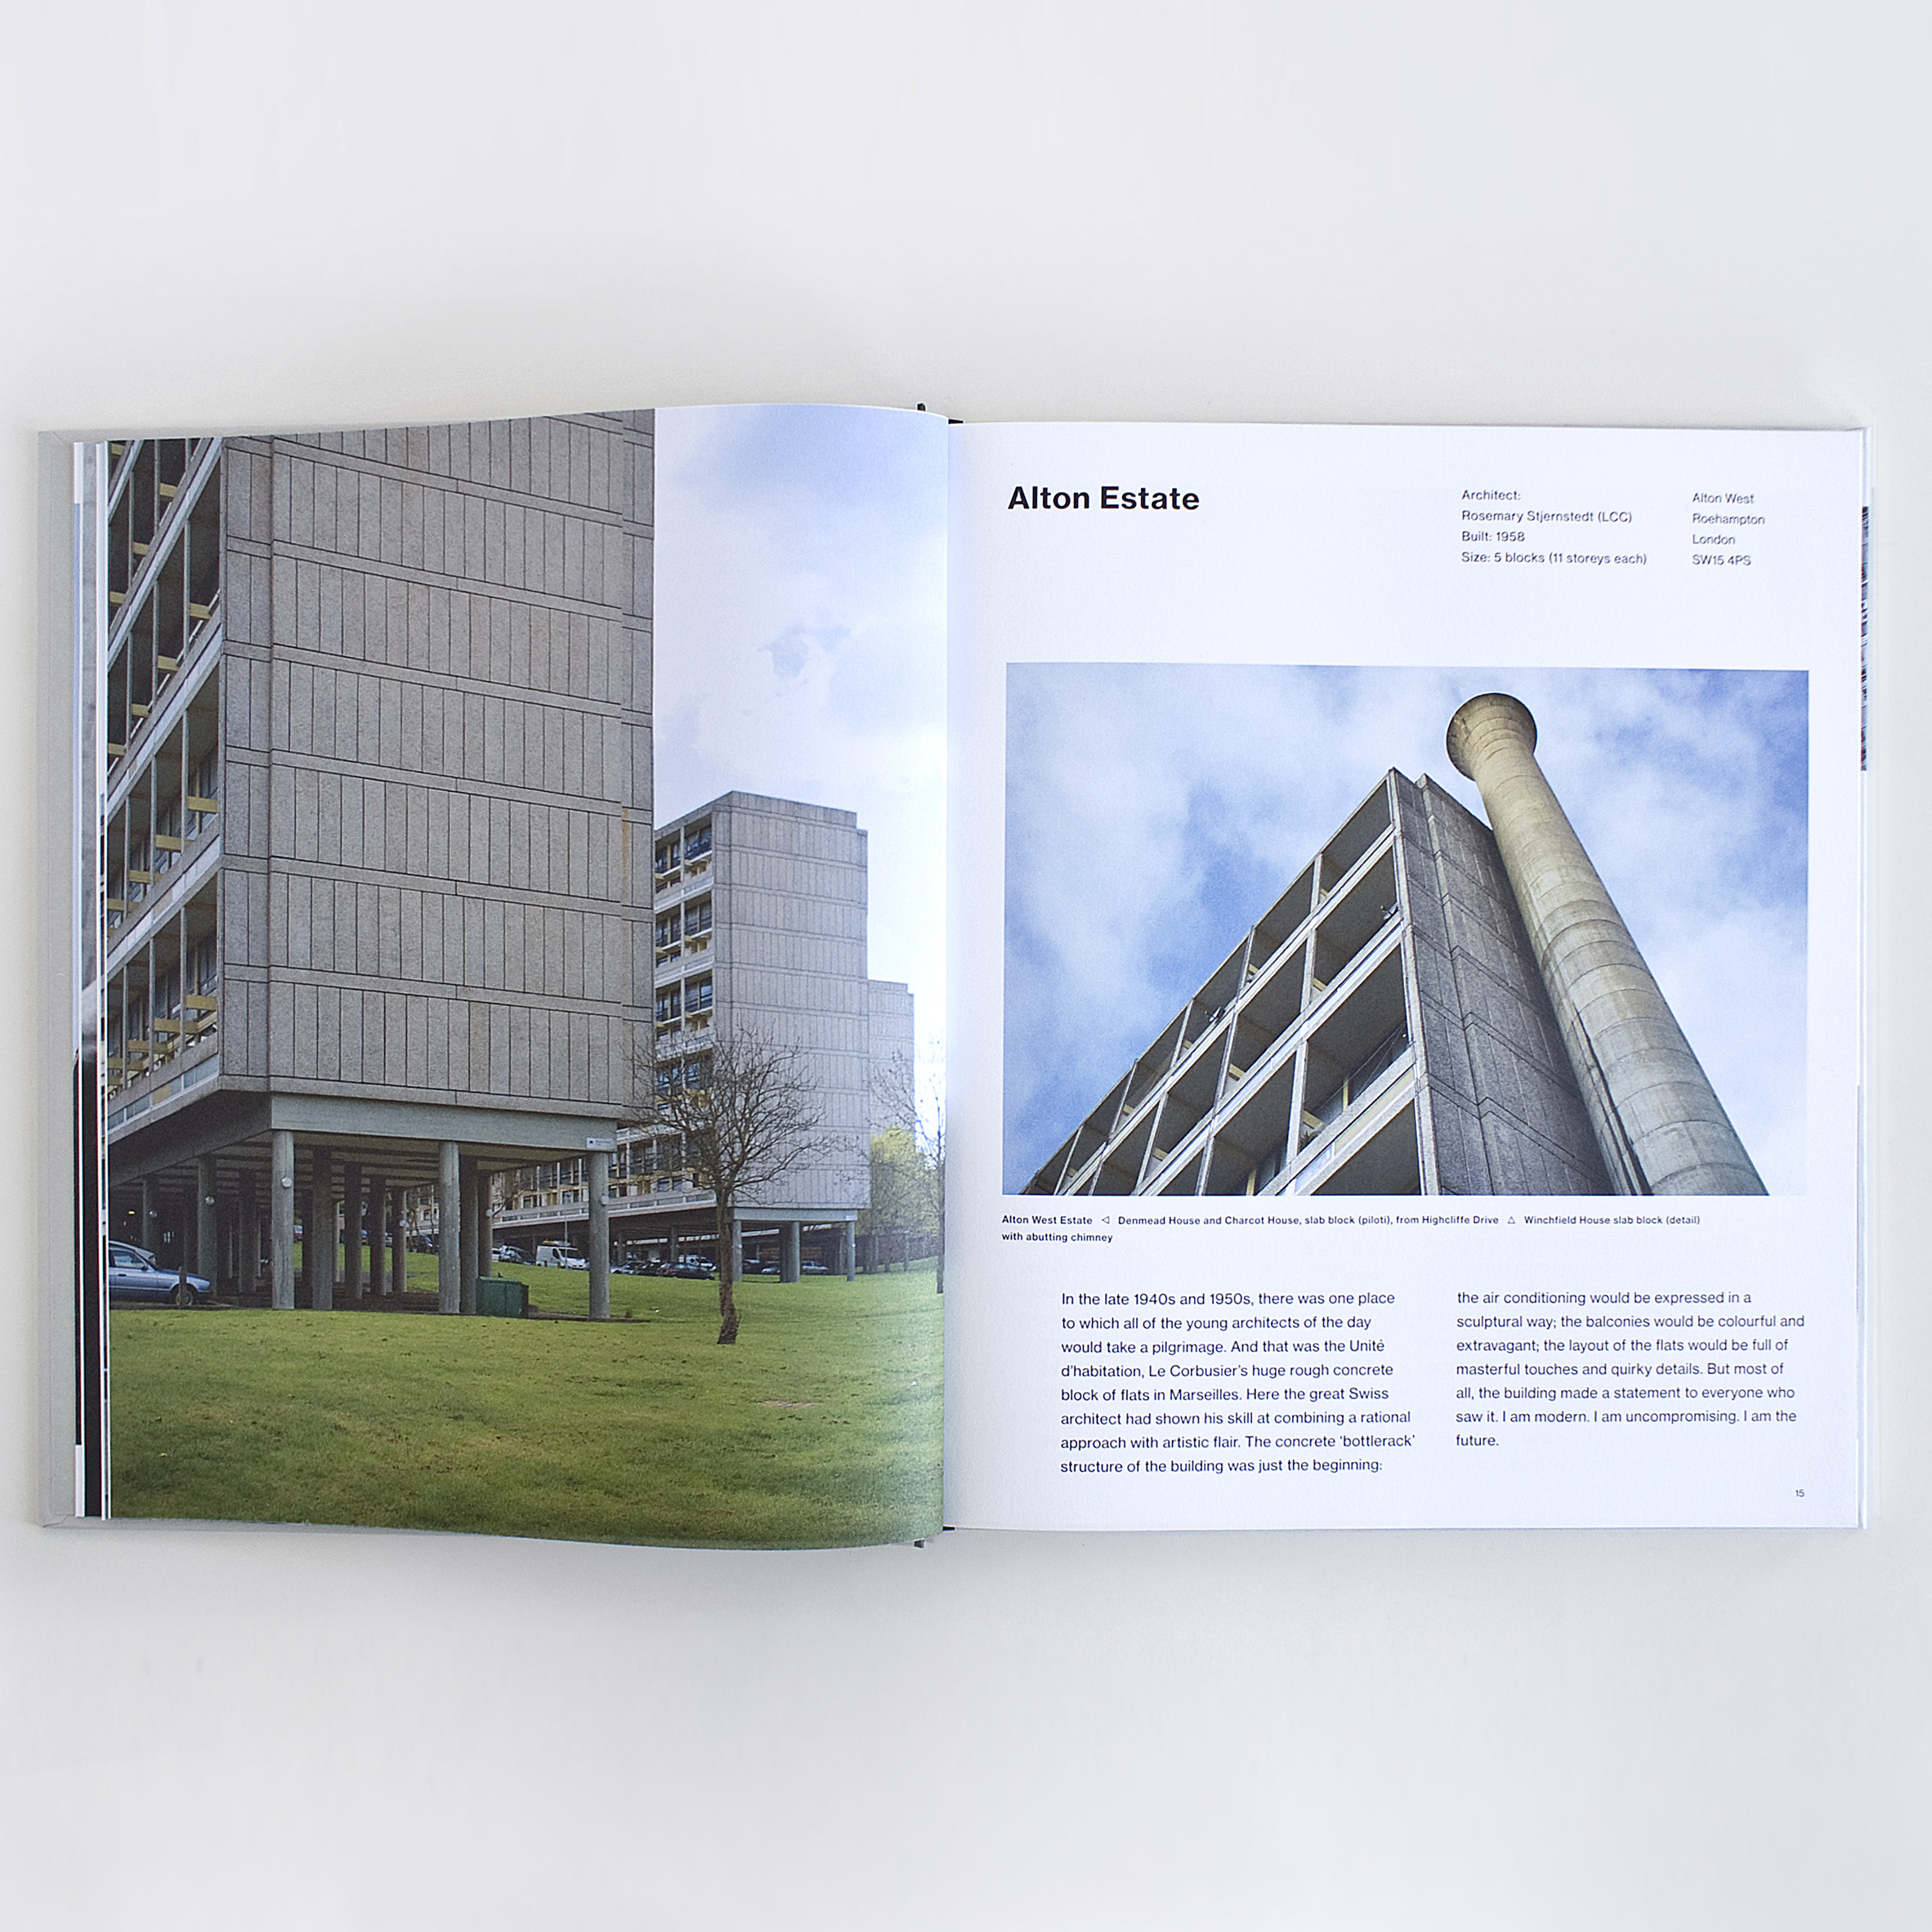 brutal-london-construct-your-own-concrete-capital-zupagrafika-competitions-books_dezeen_2364_col_5